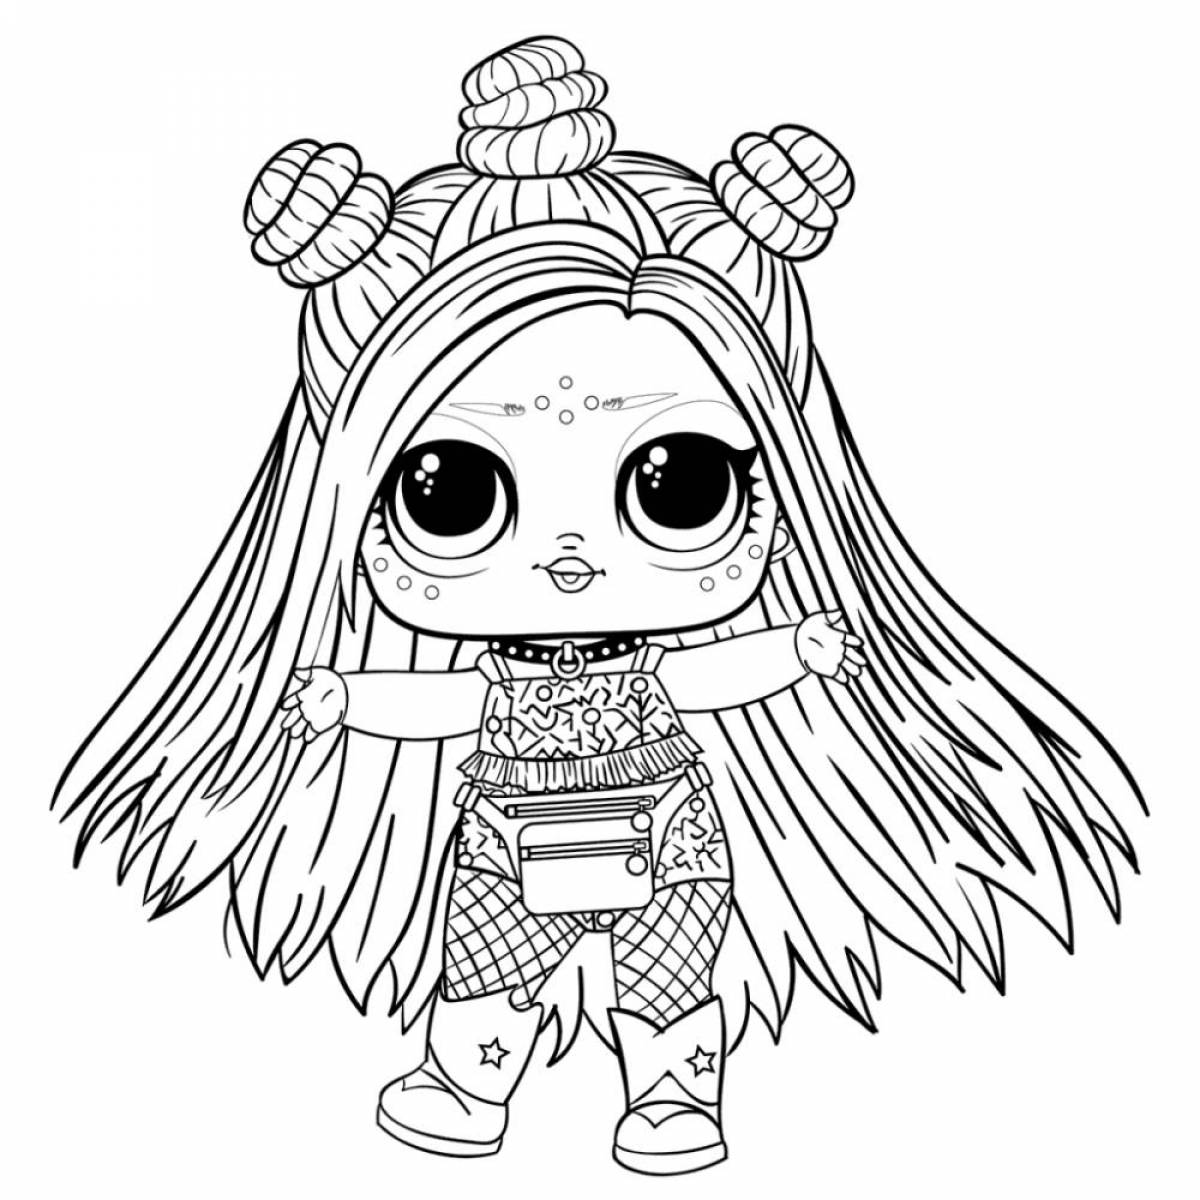 Calm doll coloring page